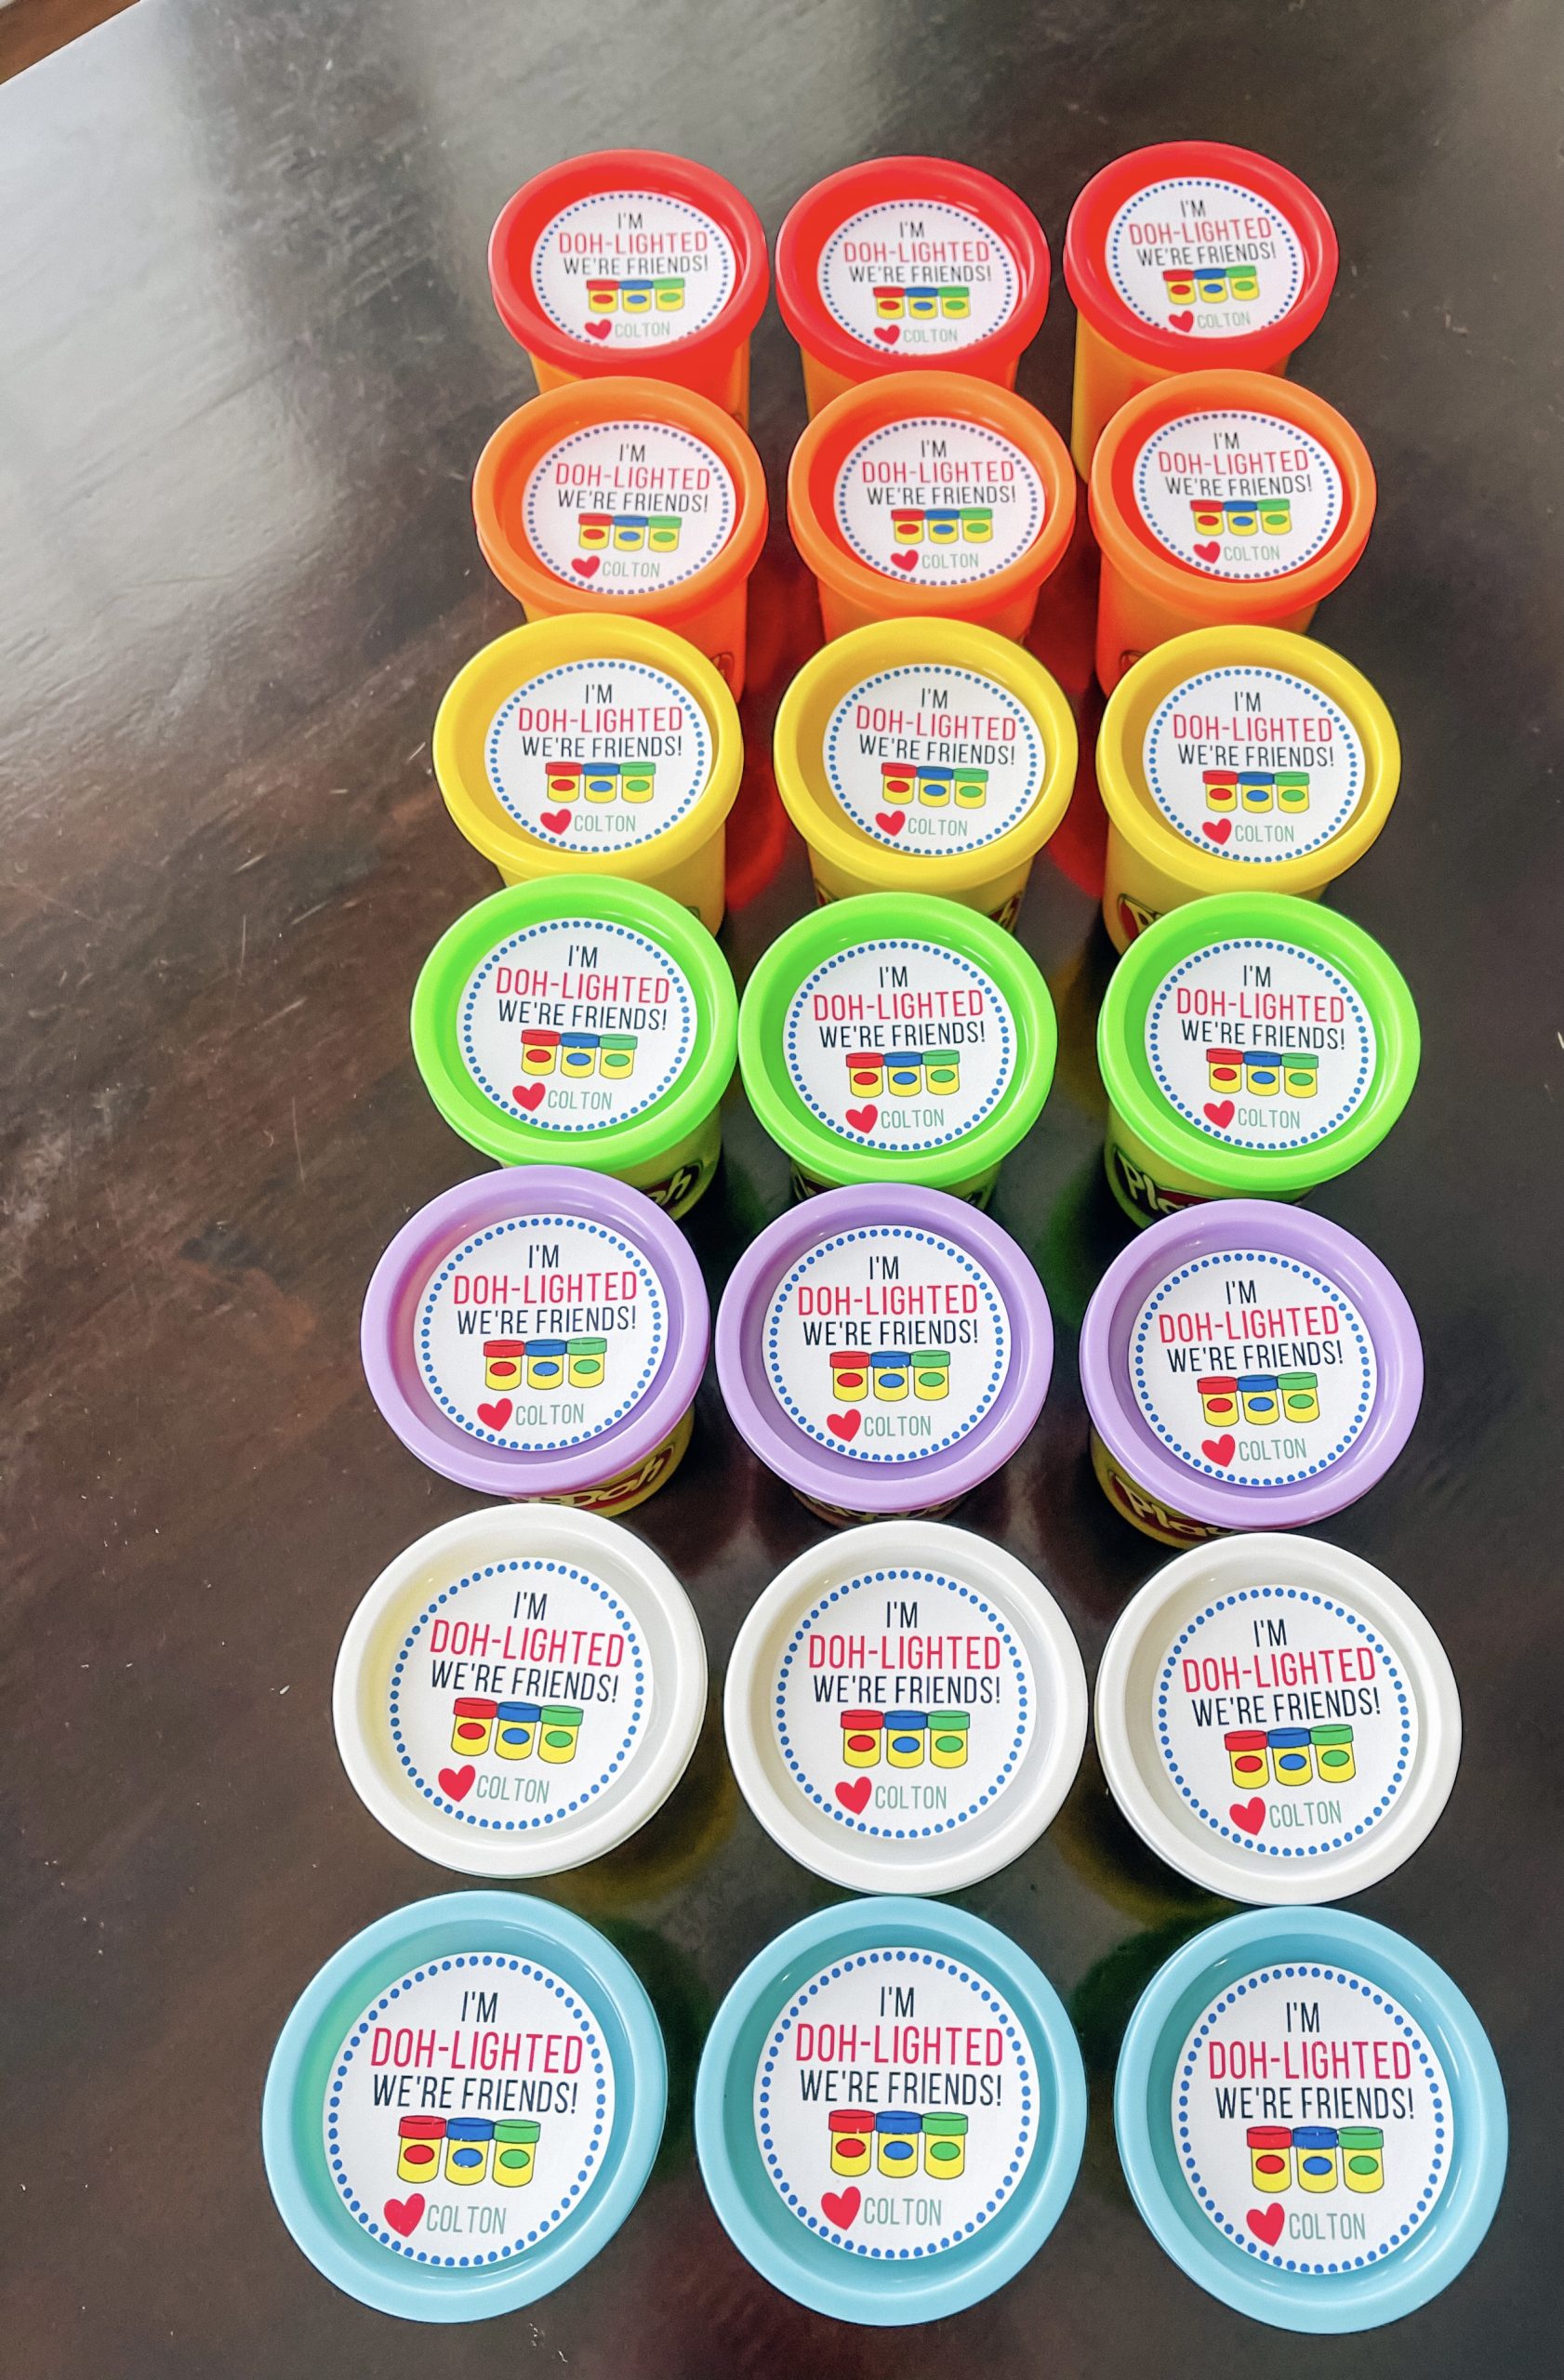 Play-Doh Party Favors - Non-Candy Party Favors - Classroom Party Favors - Play-Doh Labels - Beginner Cricut projects: These Play-Doh party favor labels are fun and easy to make! Free printable included plus Cricut Design Space file to help with cutting! #cricut #playdoh #party